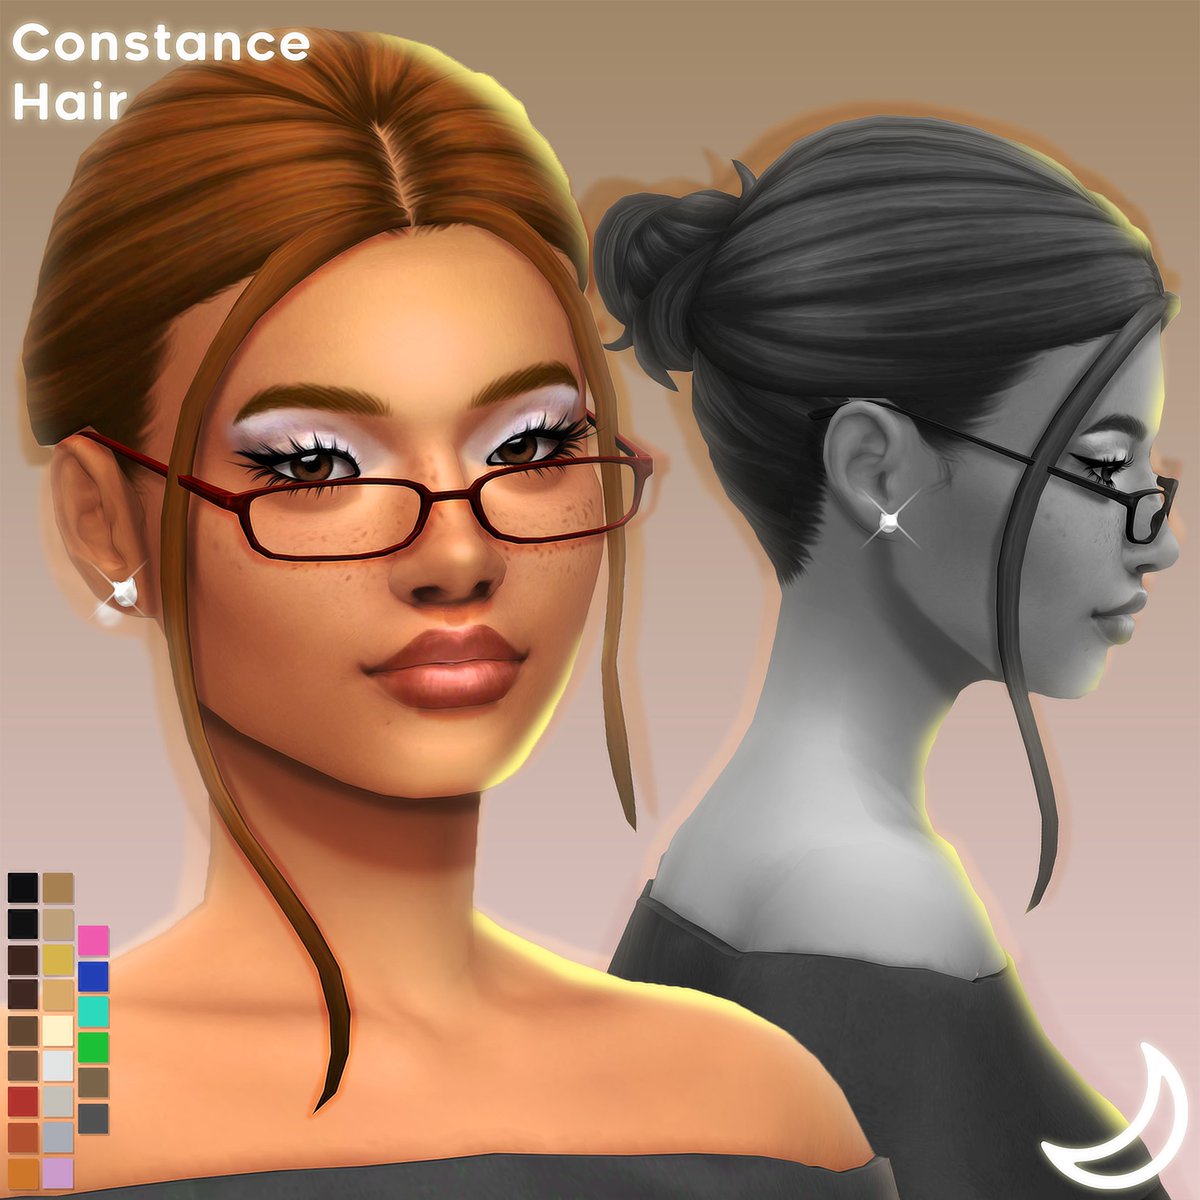 CONSTANCE HAIR BY IMVIKAI Available early for my patrons 🔗tumblr.com/imvikai/747219… (Public 04-29) #TheSims4 #ts4cc #s4cc